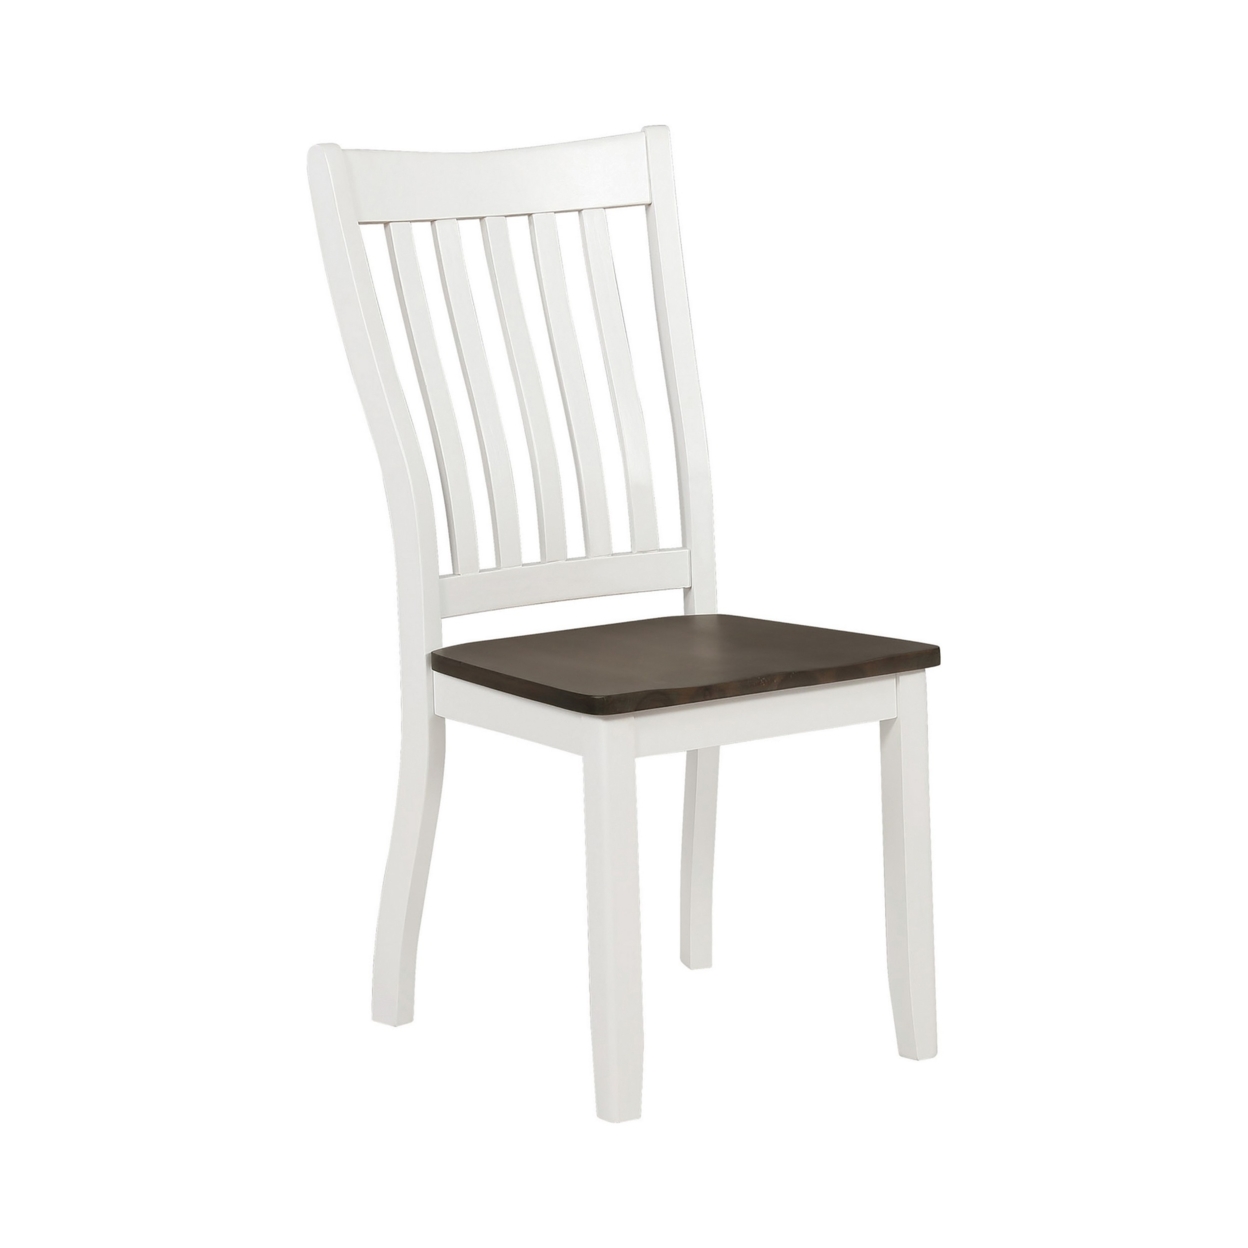 Farmhouse Wooden Dining Chair With Slatted Back, Set Of 2, White And Brown- Saltoro Sherpi